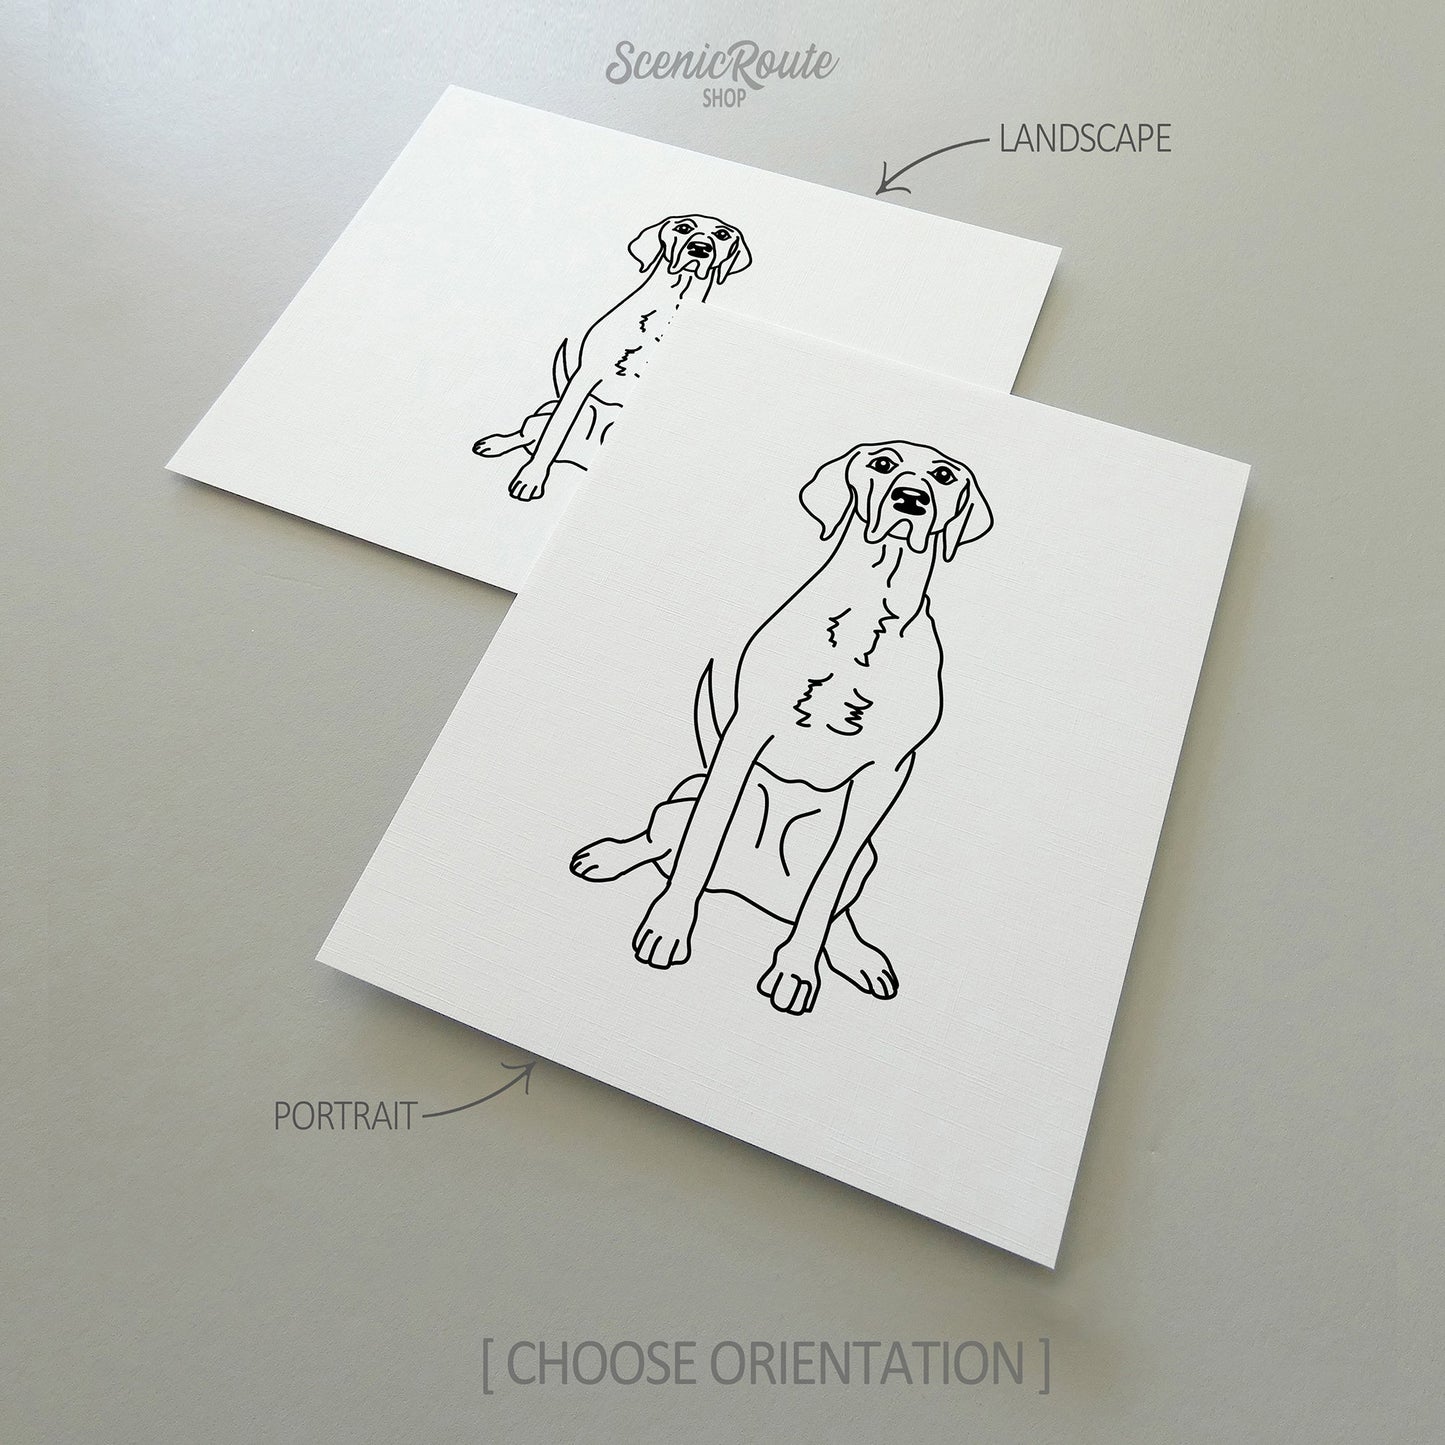 Two line art drawings of a Pointer dog on white linen paper with a gray background.  The pieces are shown in portrait and landscape orientation for the available art print options.